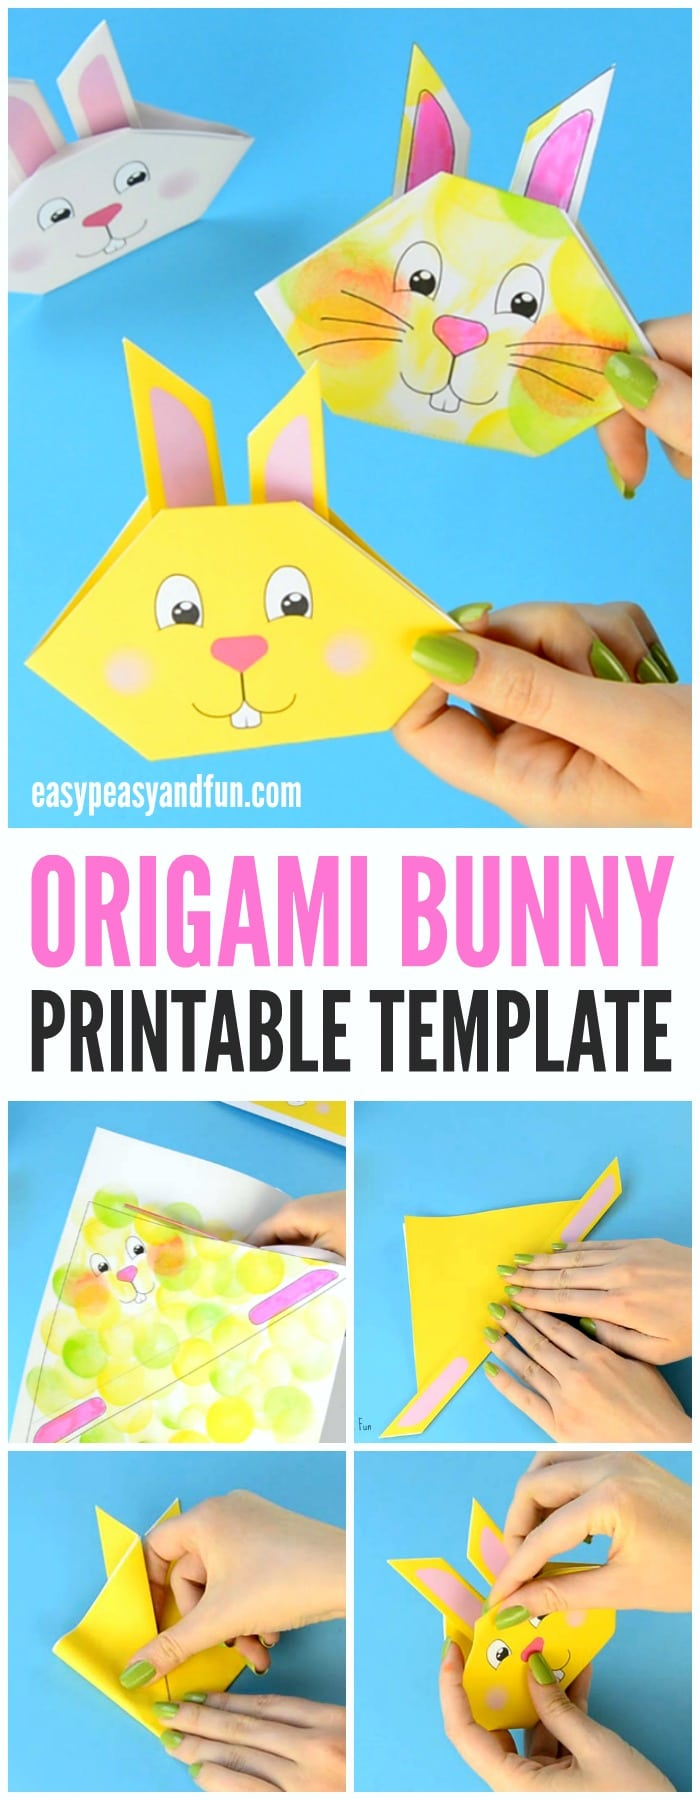 Simple Origami Rabbit Origami Bunny Tutorial With Printable Template Easy Peasy And Fun